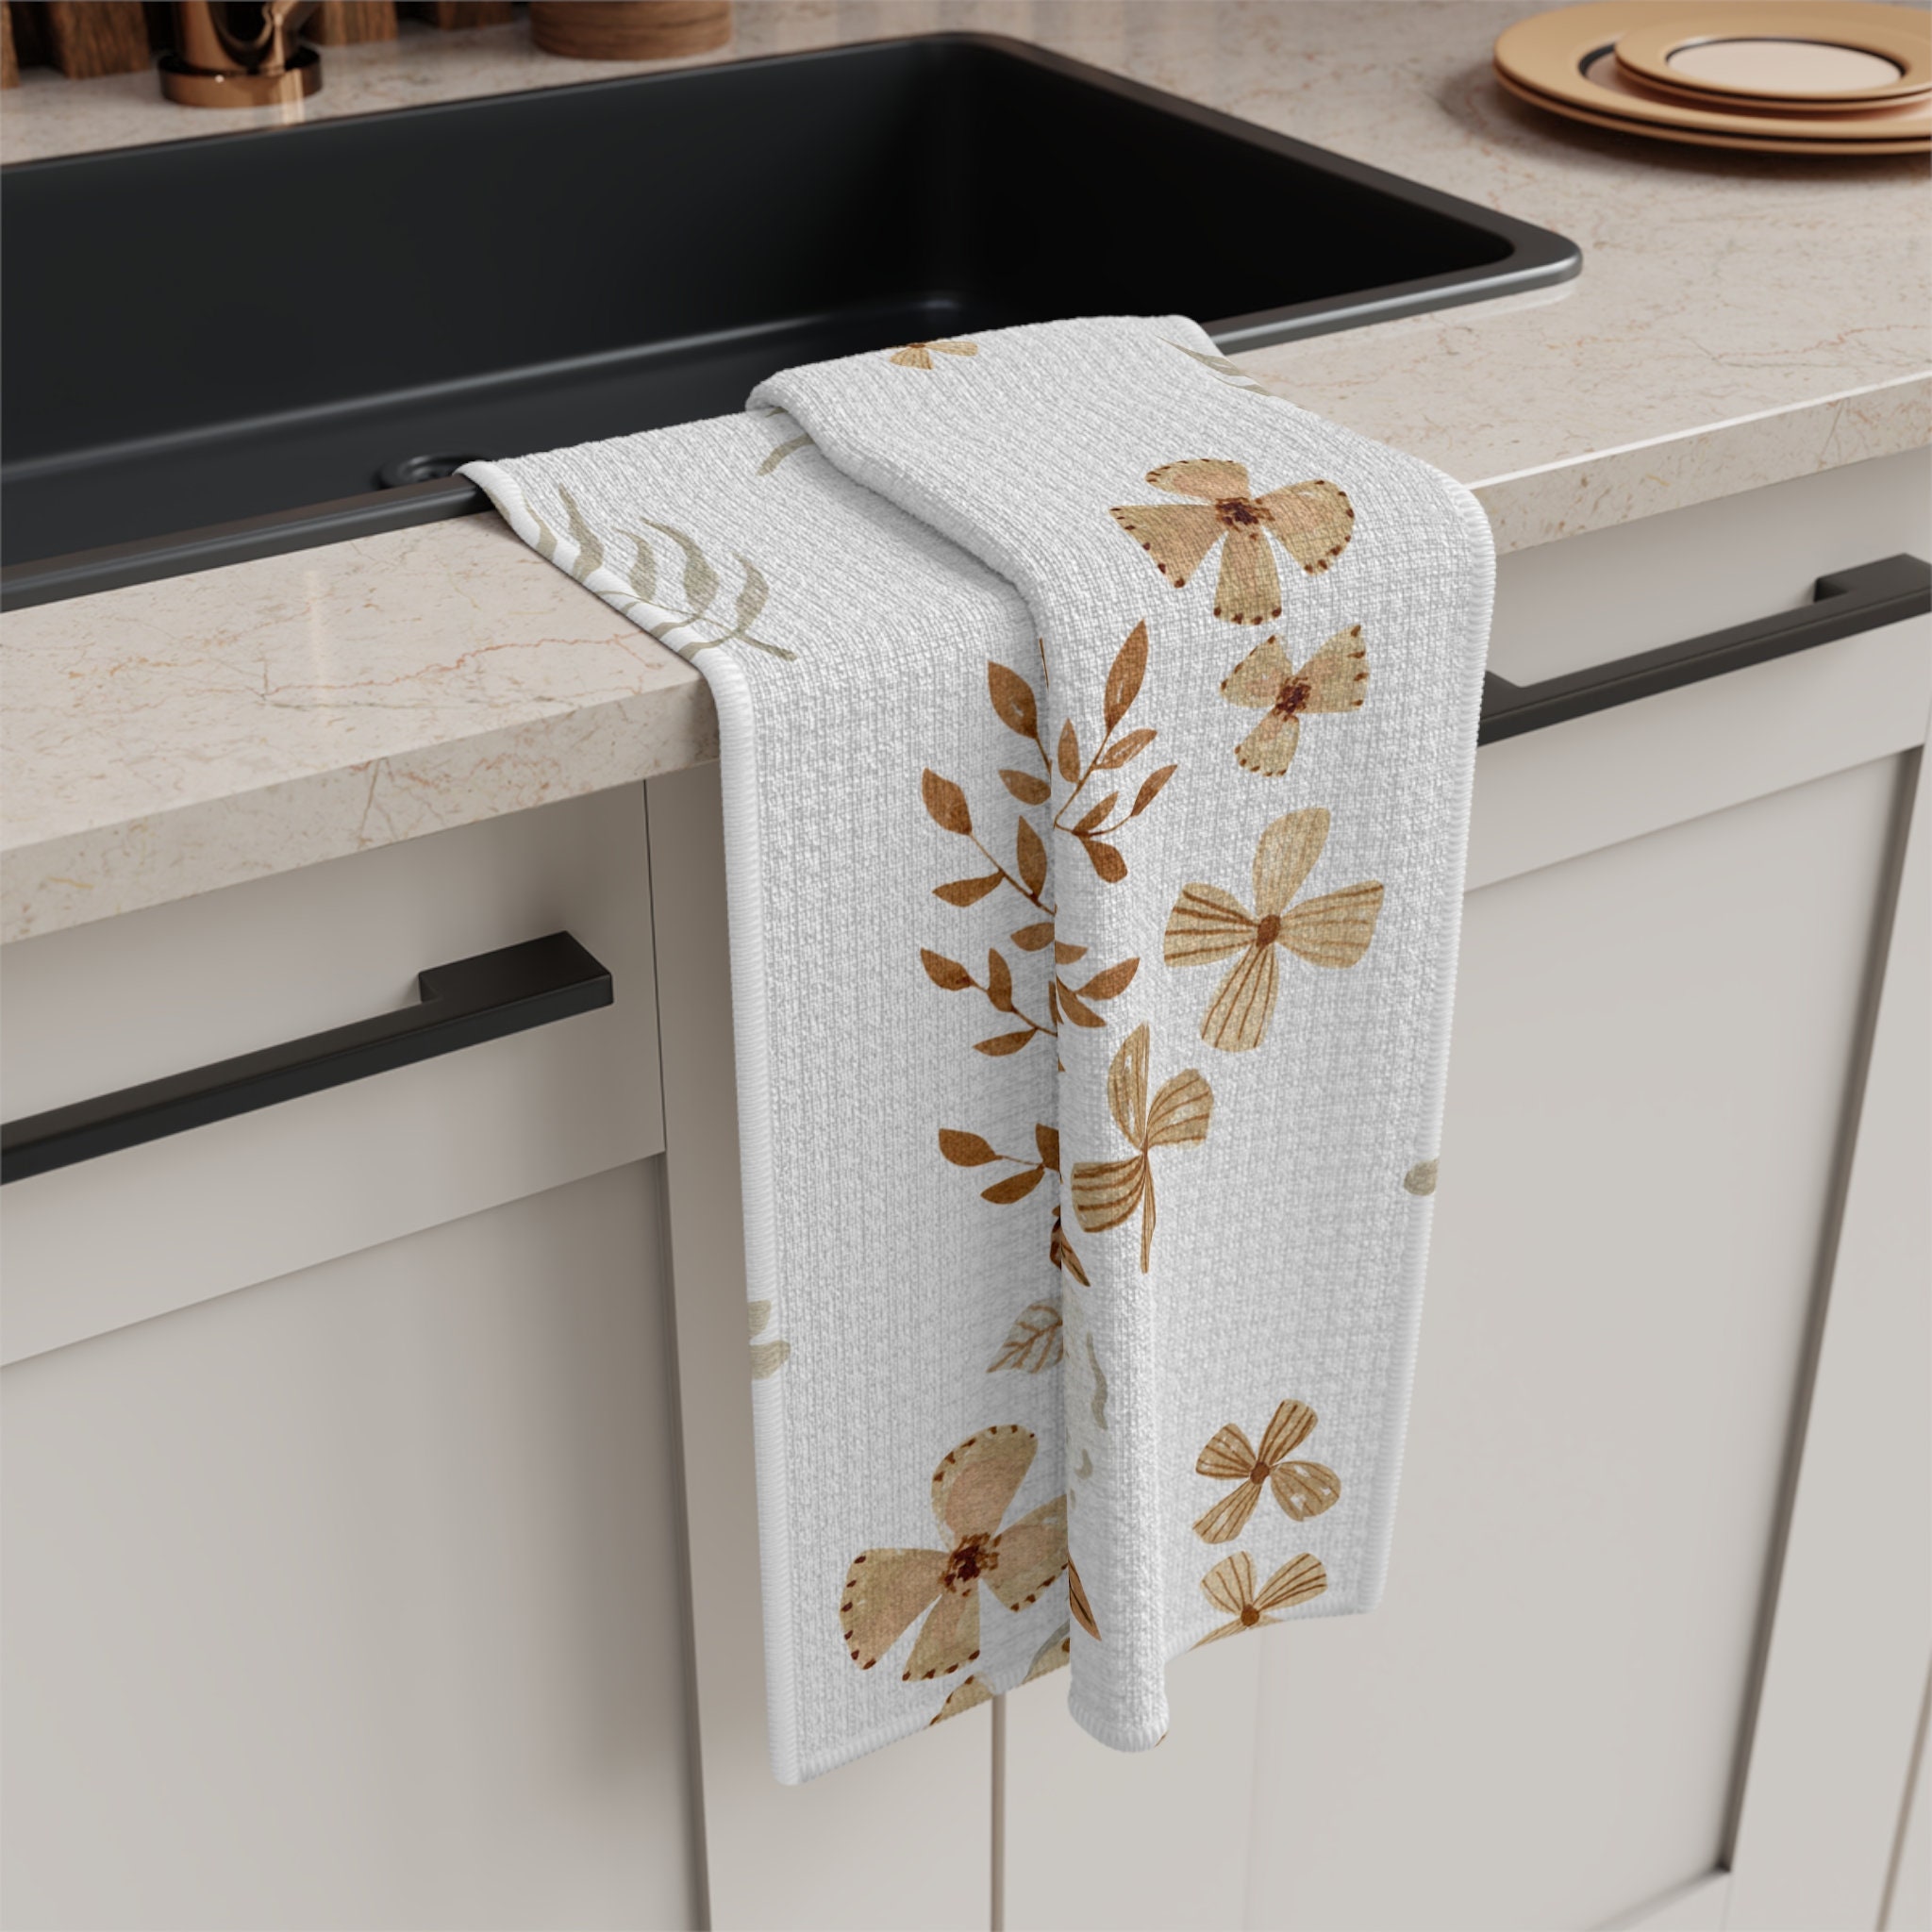 Cute Tea Towels Are the Easiest Way to Dress up Your Kitchen – StyleCaster